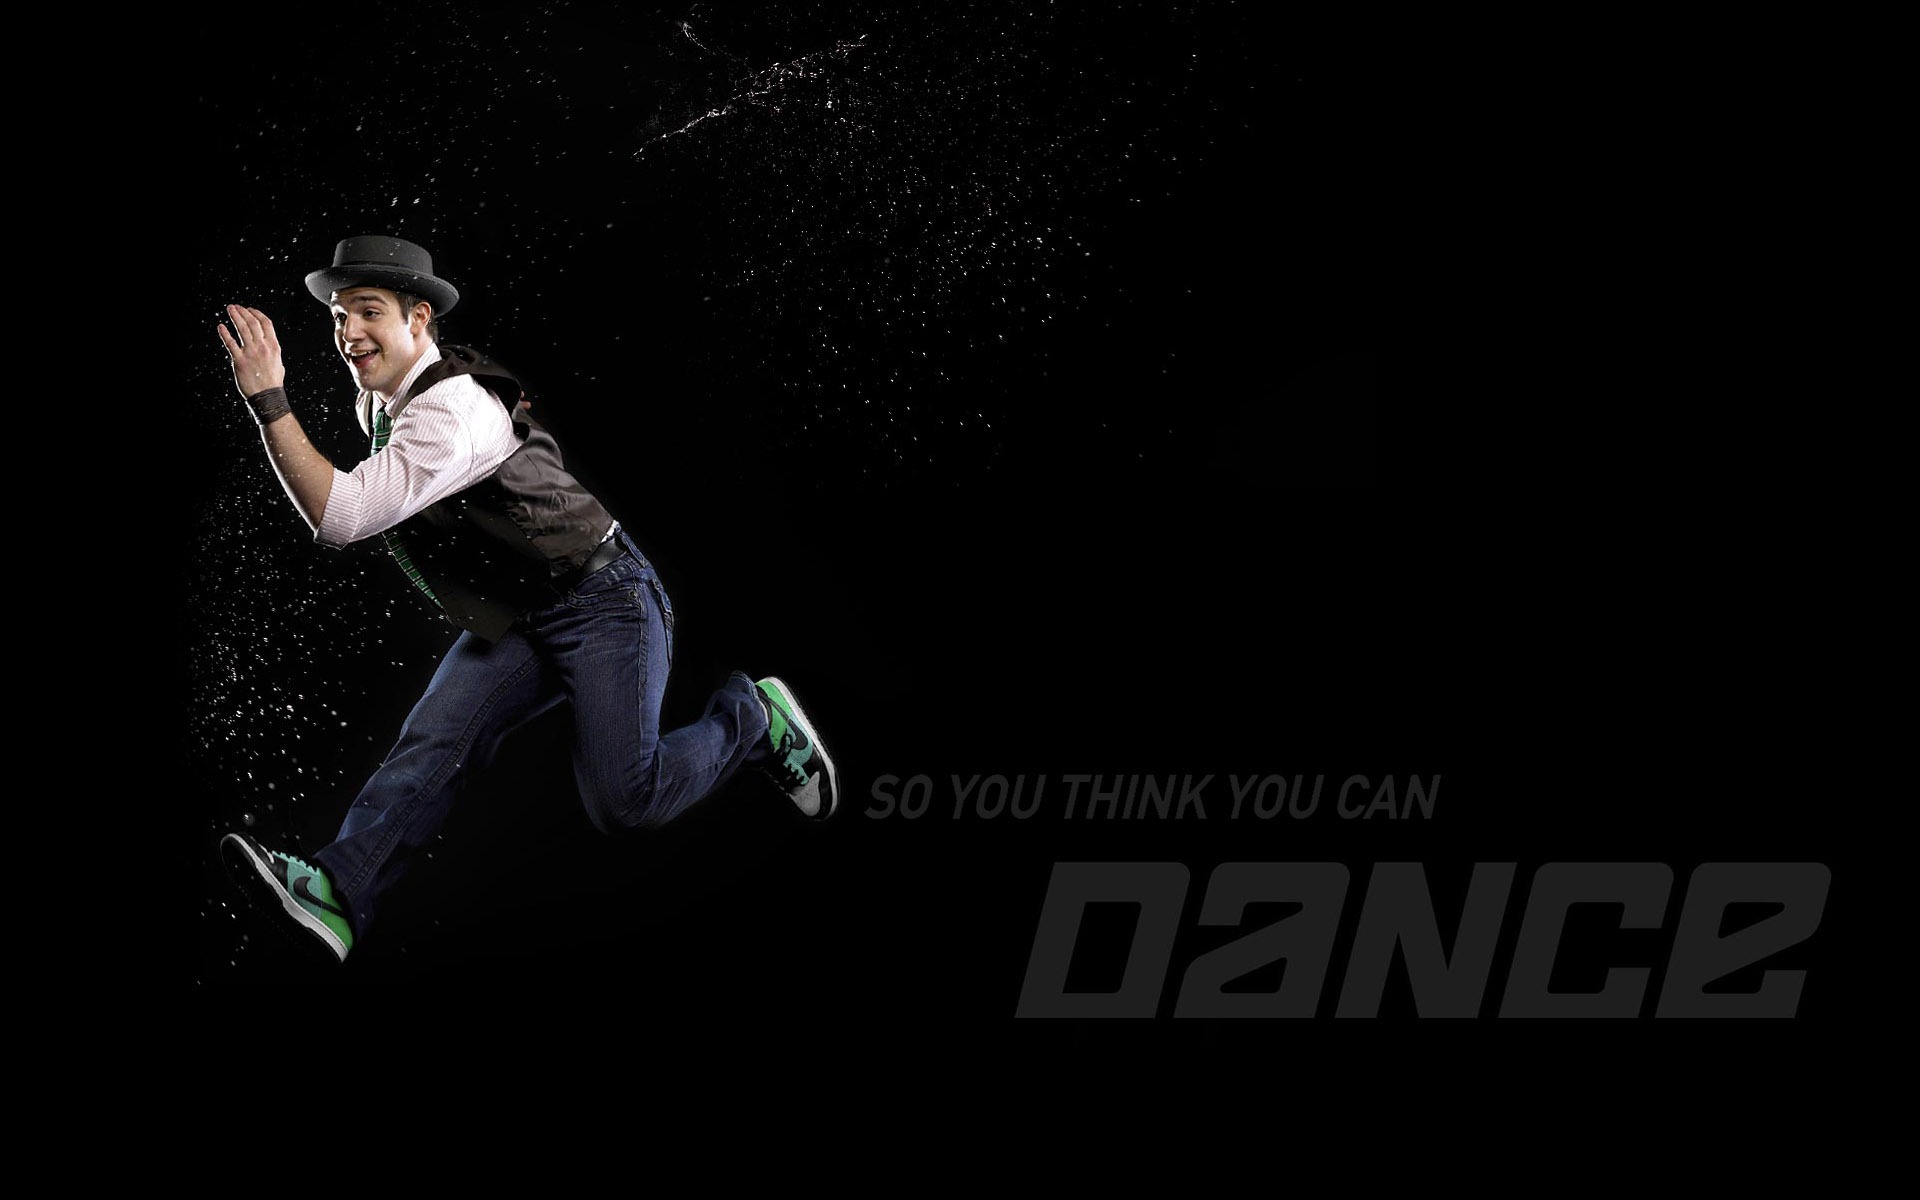 So You Think You Can Dance 舞林争霸 壁纸(一)14 - 1920x1200